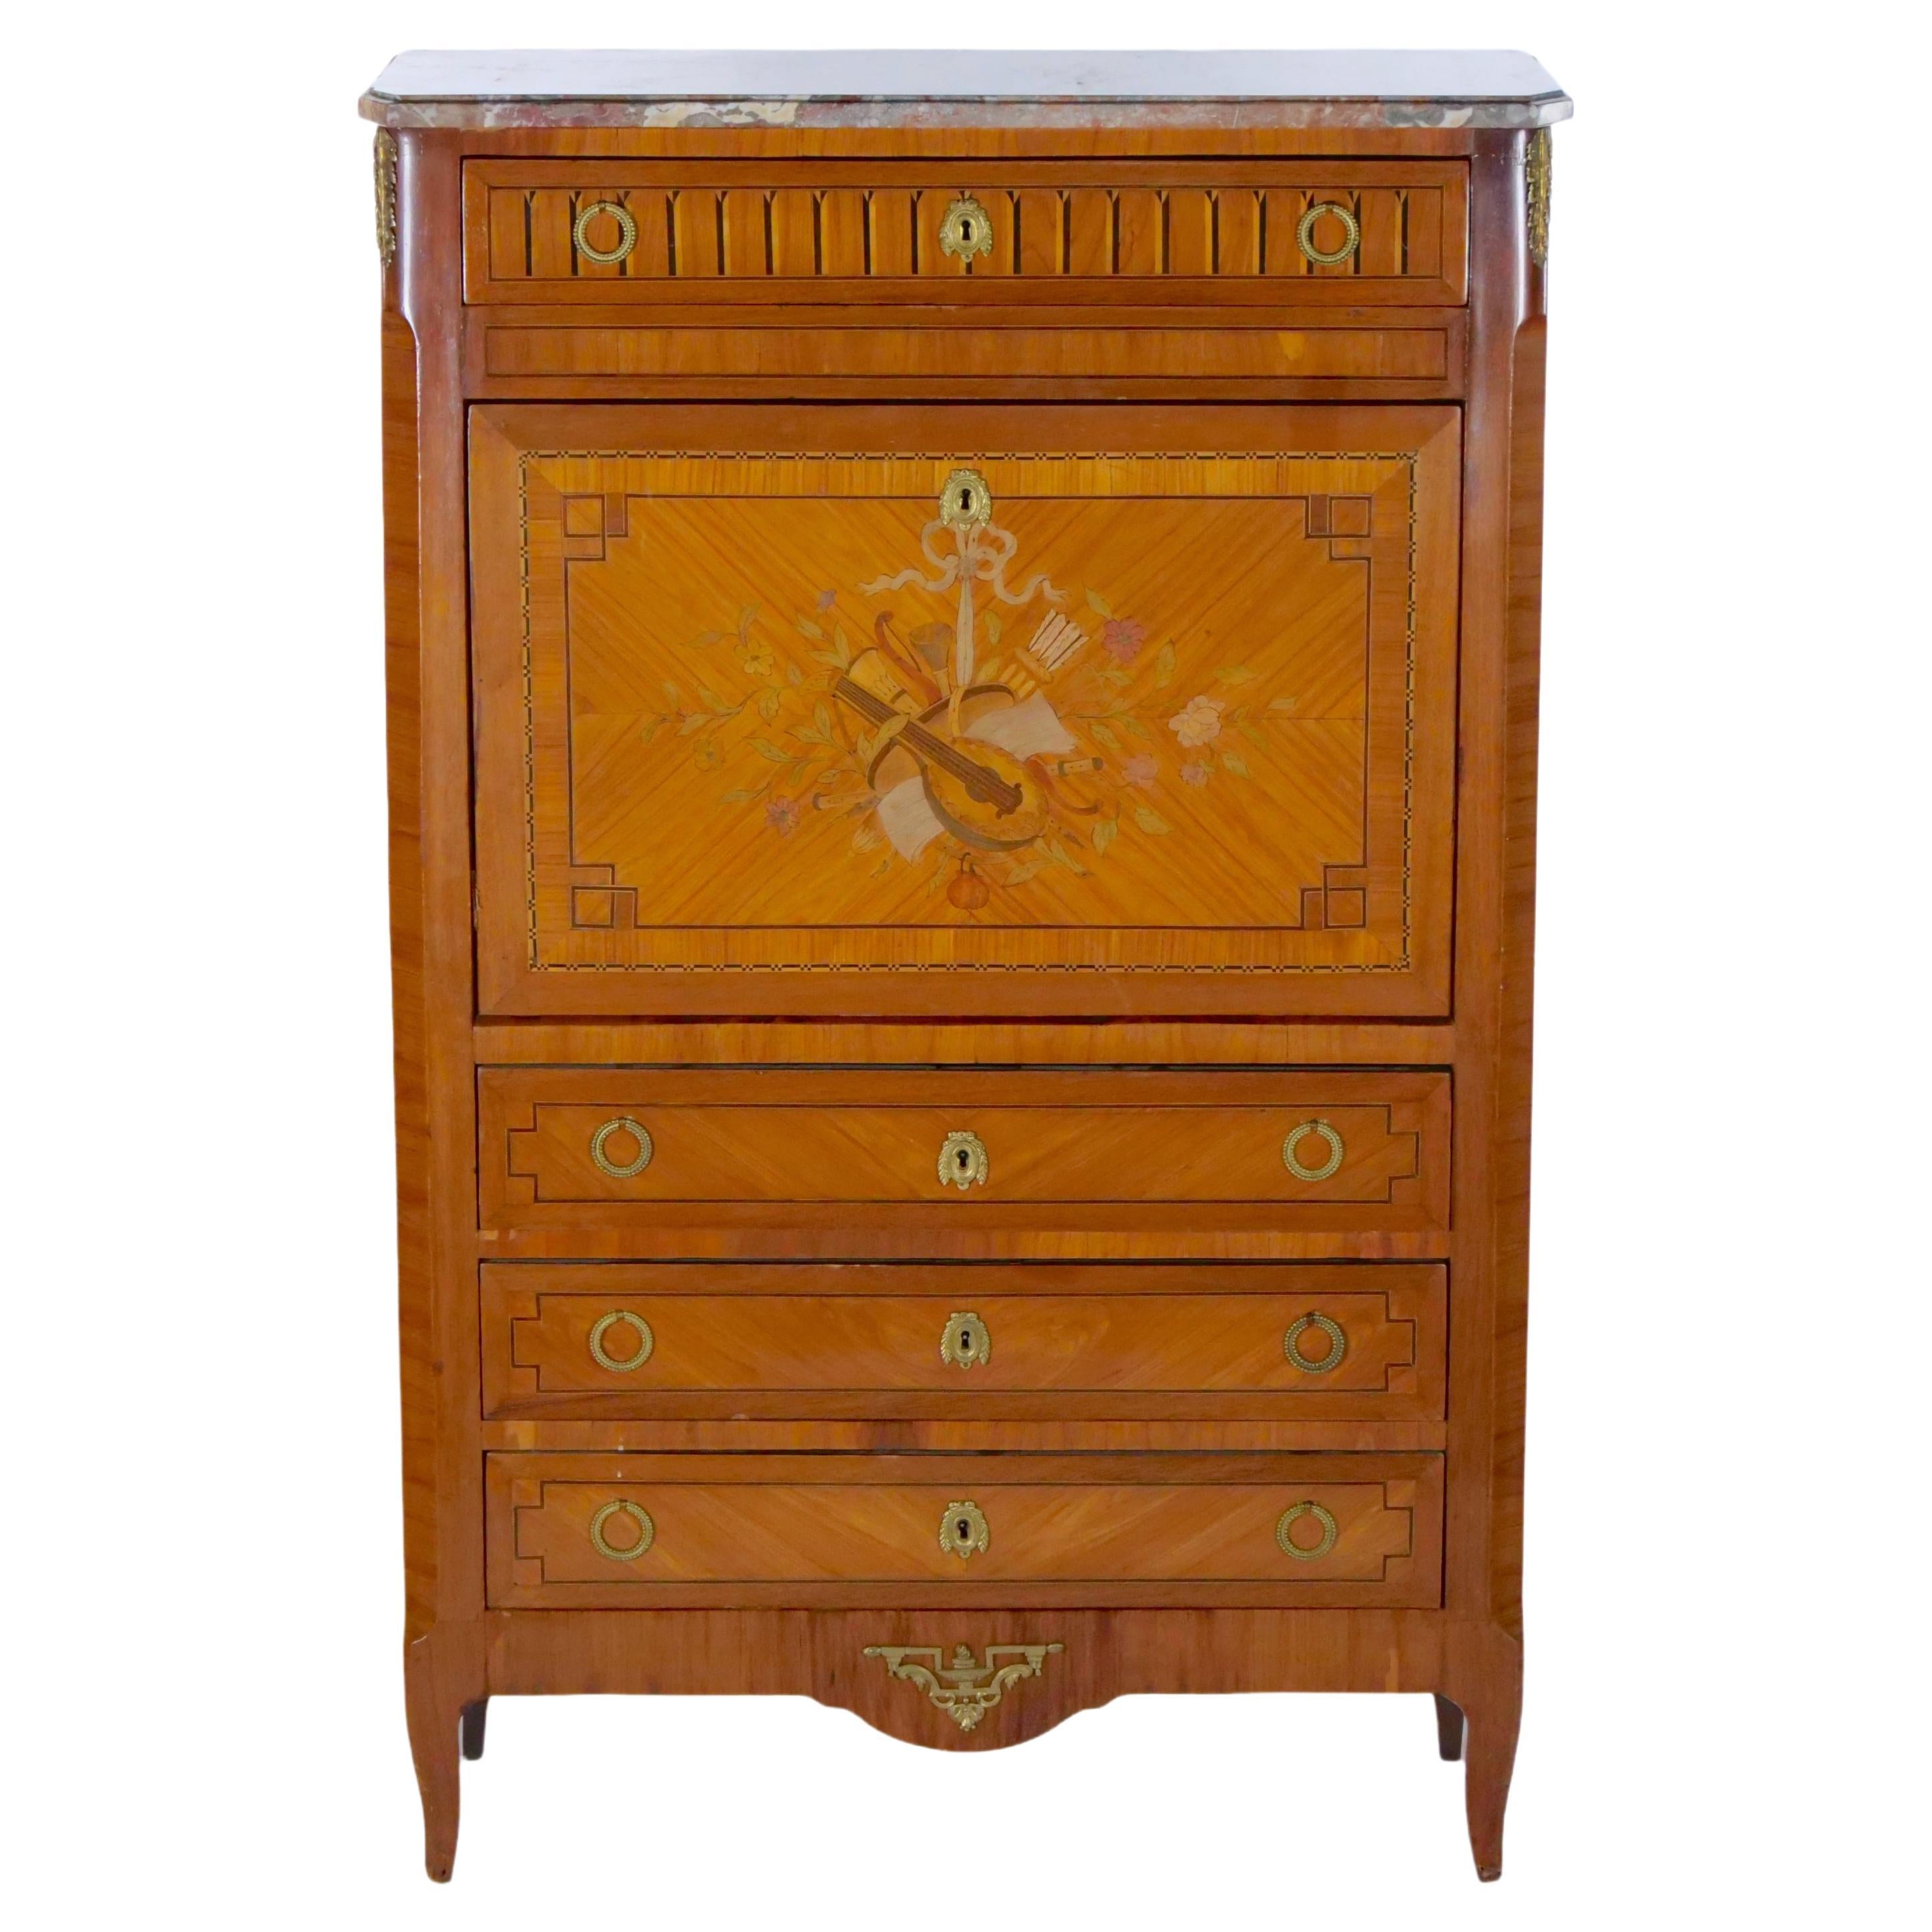 19th Century Louis Philippe Style Fall Front Secretary Chest